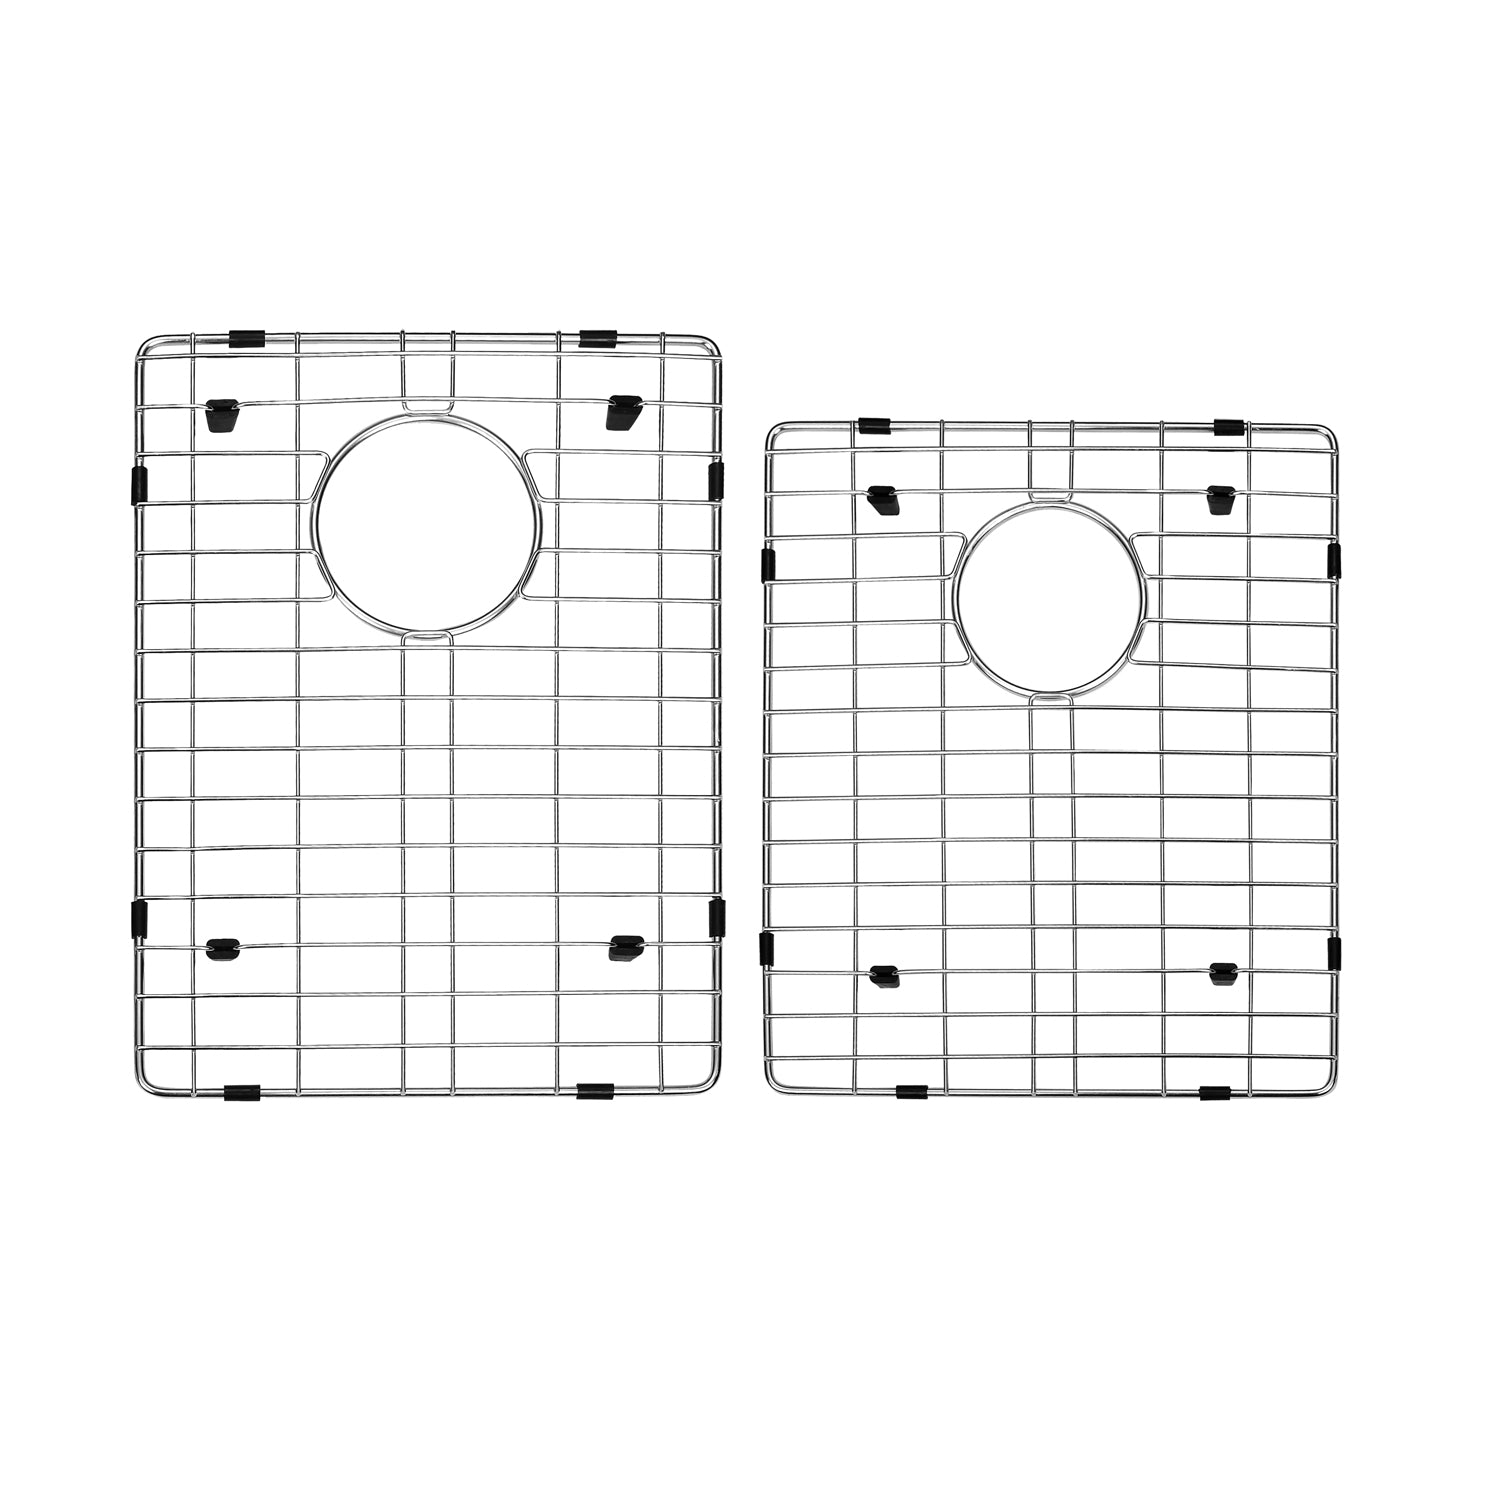 DAX Grid for Kitchen Sink, Stainless Steel Body, Chrome Finish, Compatible with DAX-SQ-3120, 17-3/4 x 13-1/2 Inches (GRID-SQ3120)